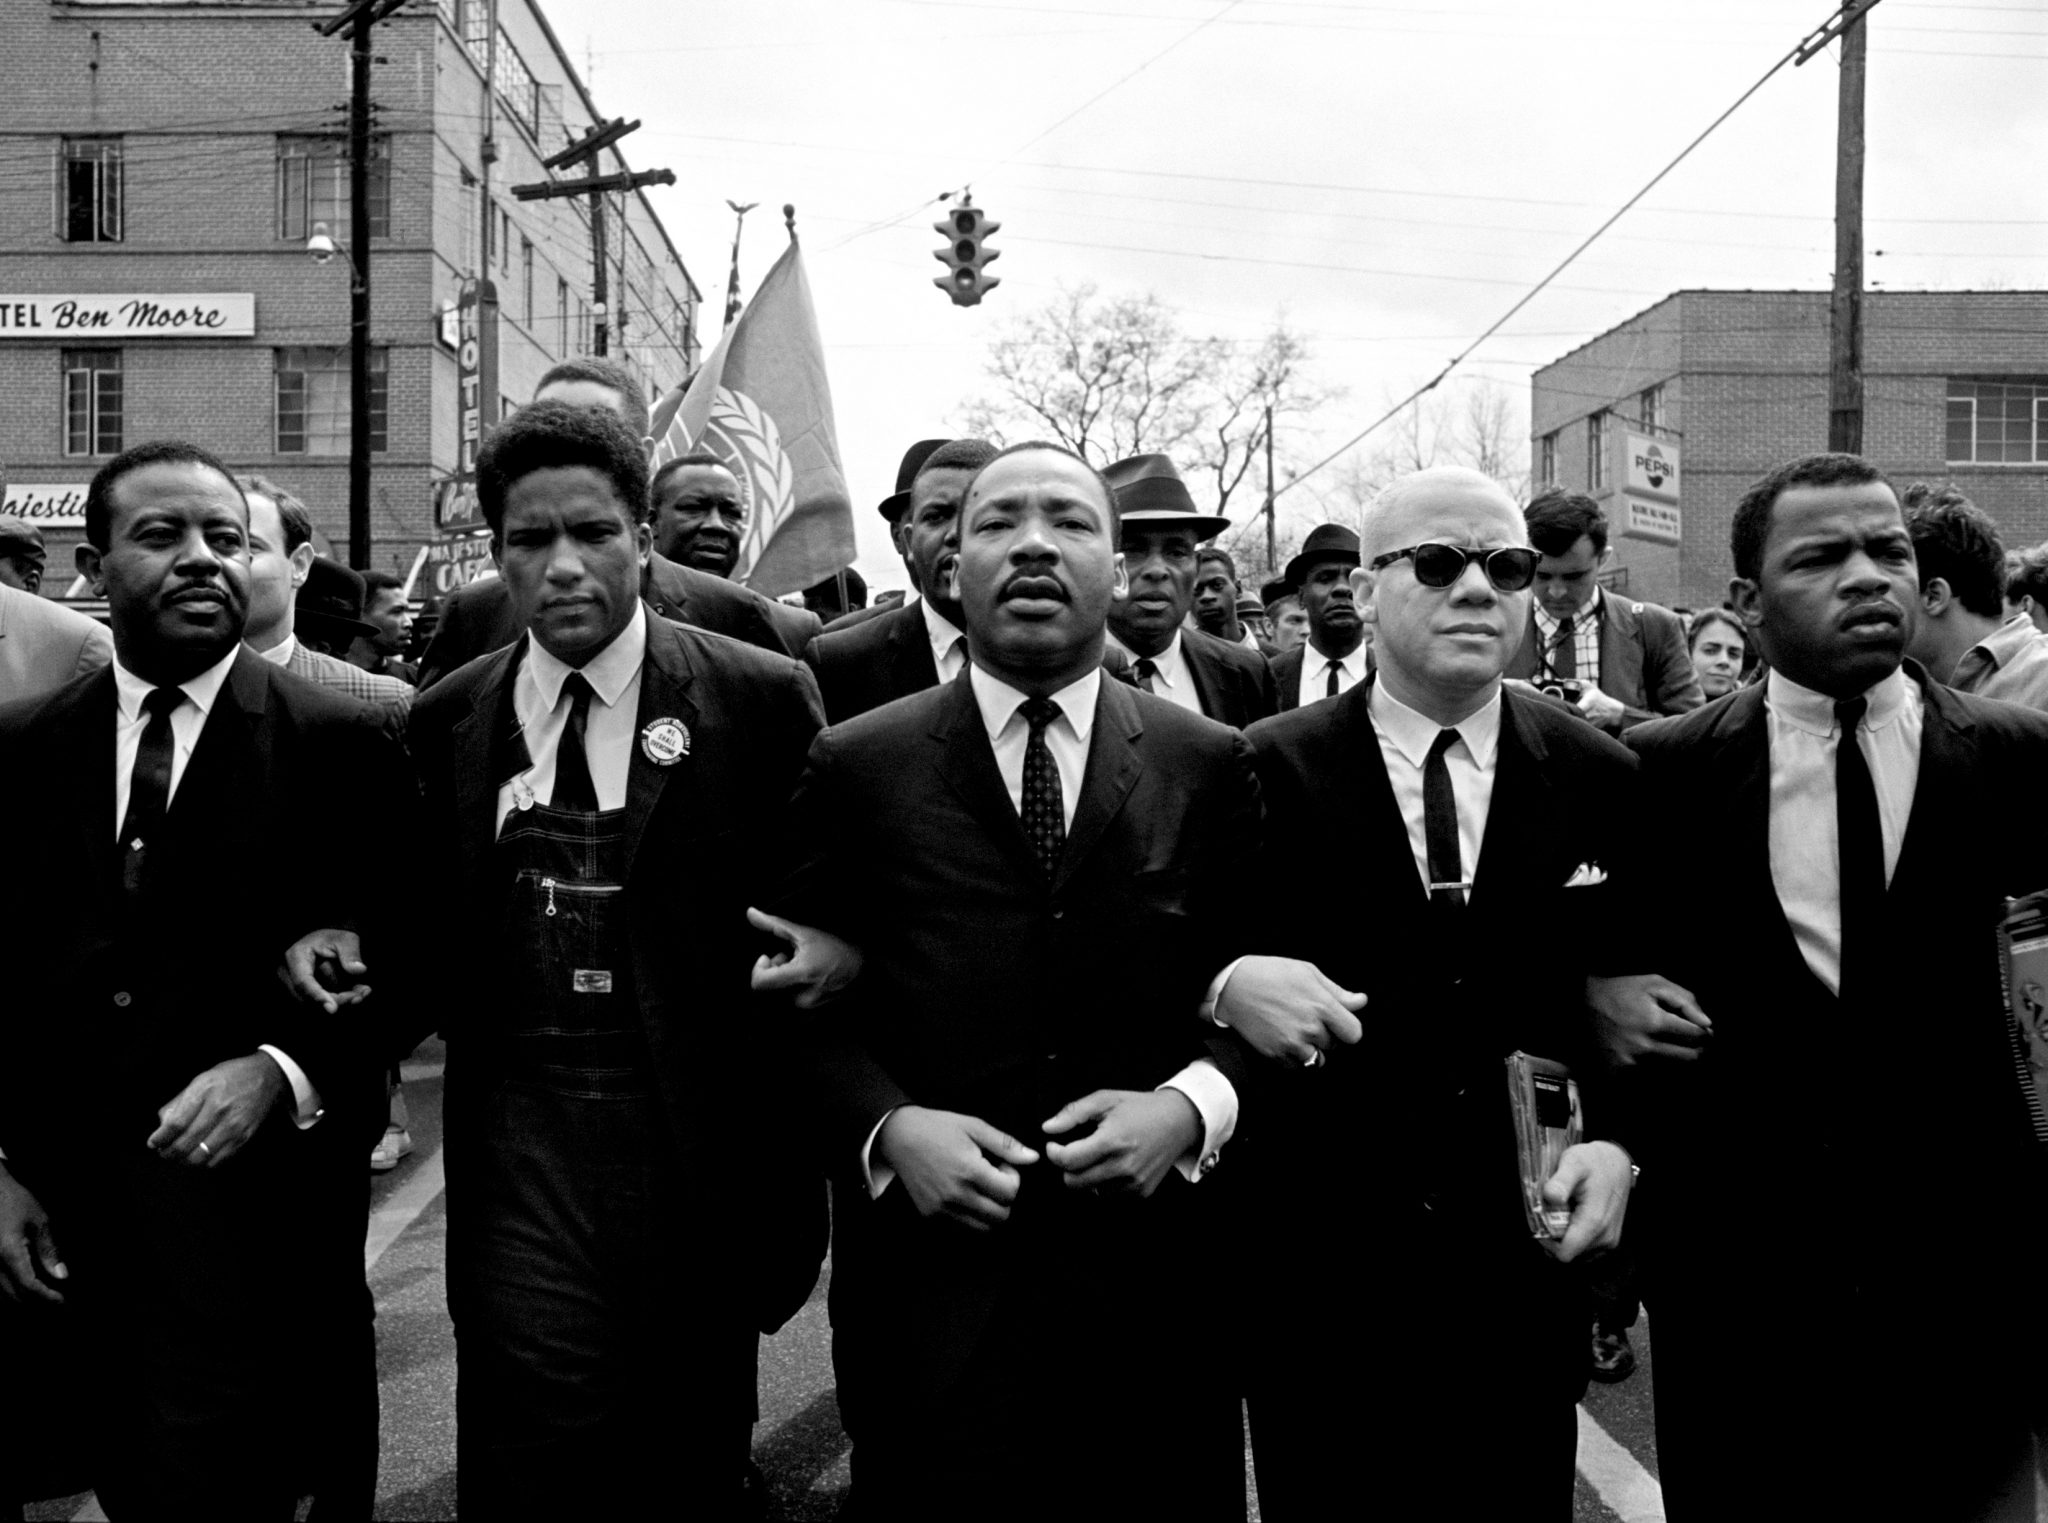 Martin Luther King, Jr. Leads Selma to Montgomery March Martin Luther King, Jr. leading march from Selma to Montgomery to protest lack of voting rights for African Americans. Beside King is John Lewis, Reverend Jesse Douglas, James Forman and Ralph Abernathy. (Photo by Steve Schapiro/Corbis via Getty Images)